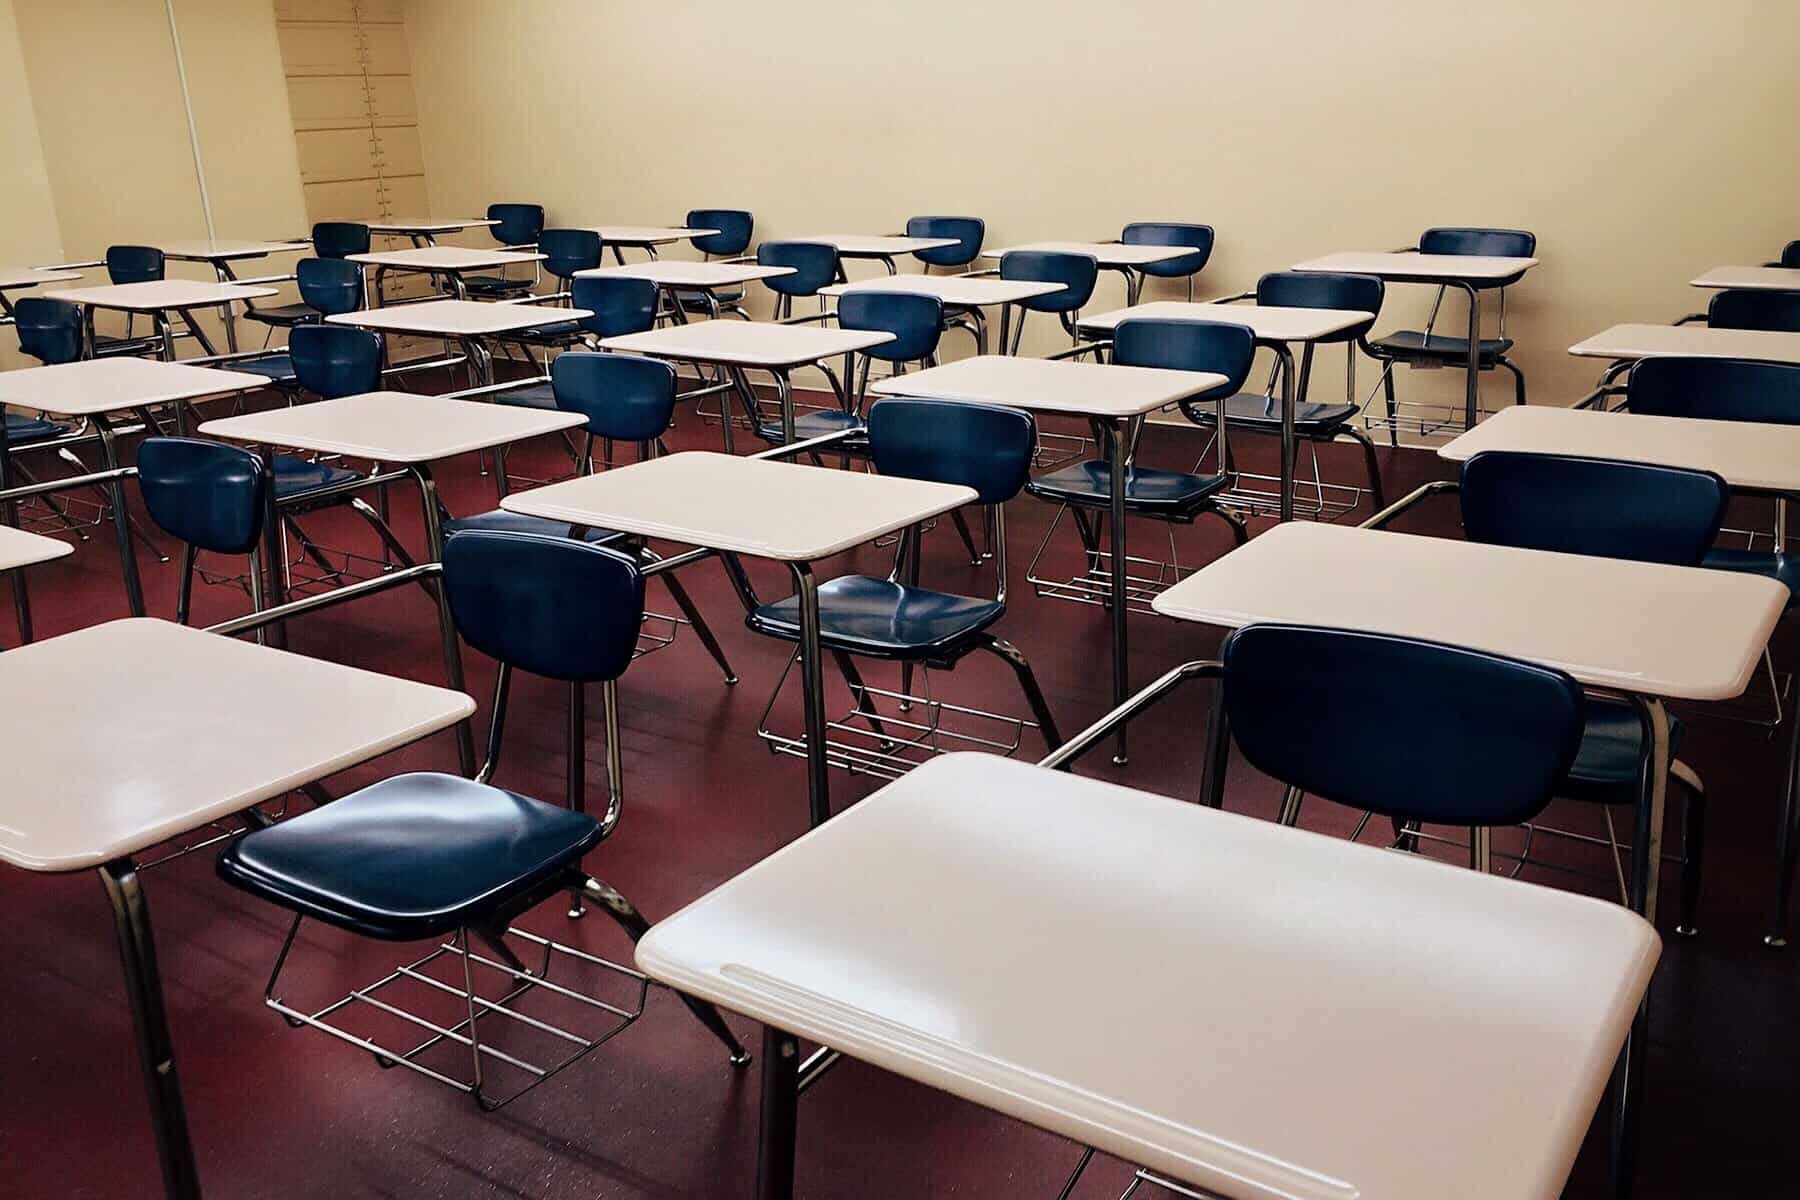 A schoolroom filled with desks and chairs is shown.